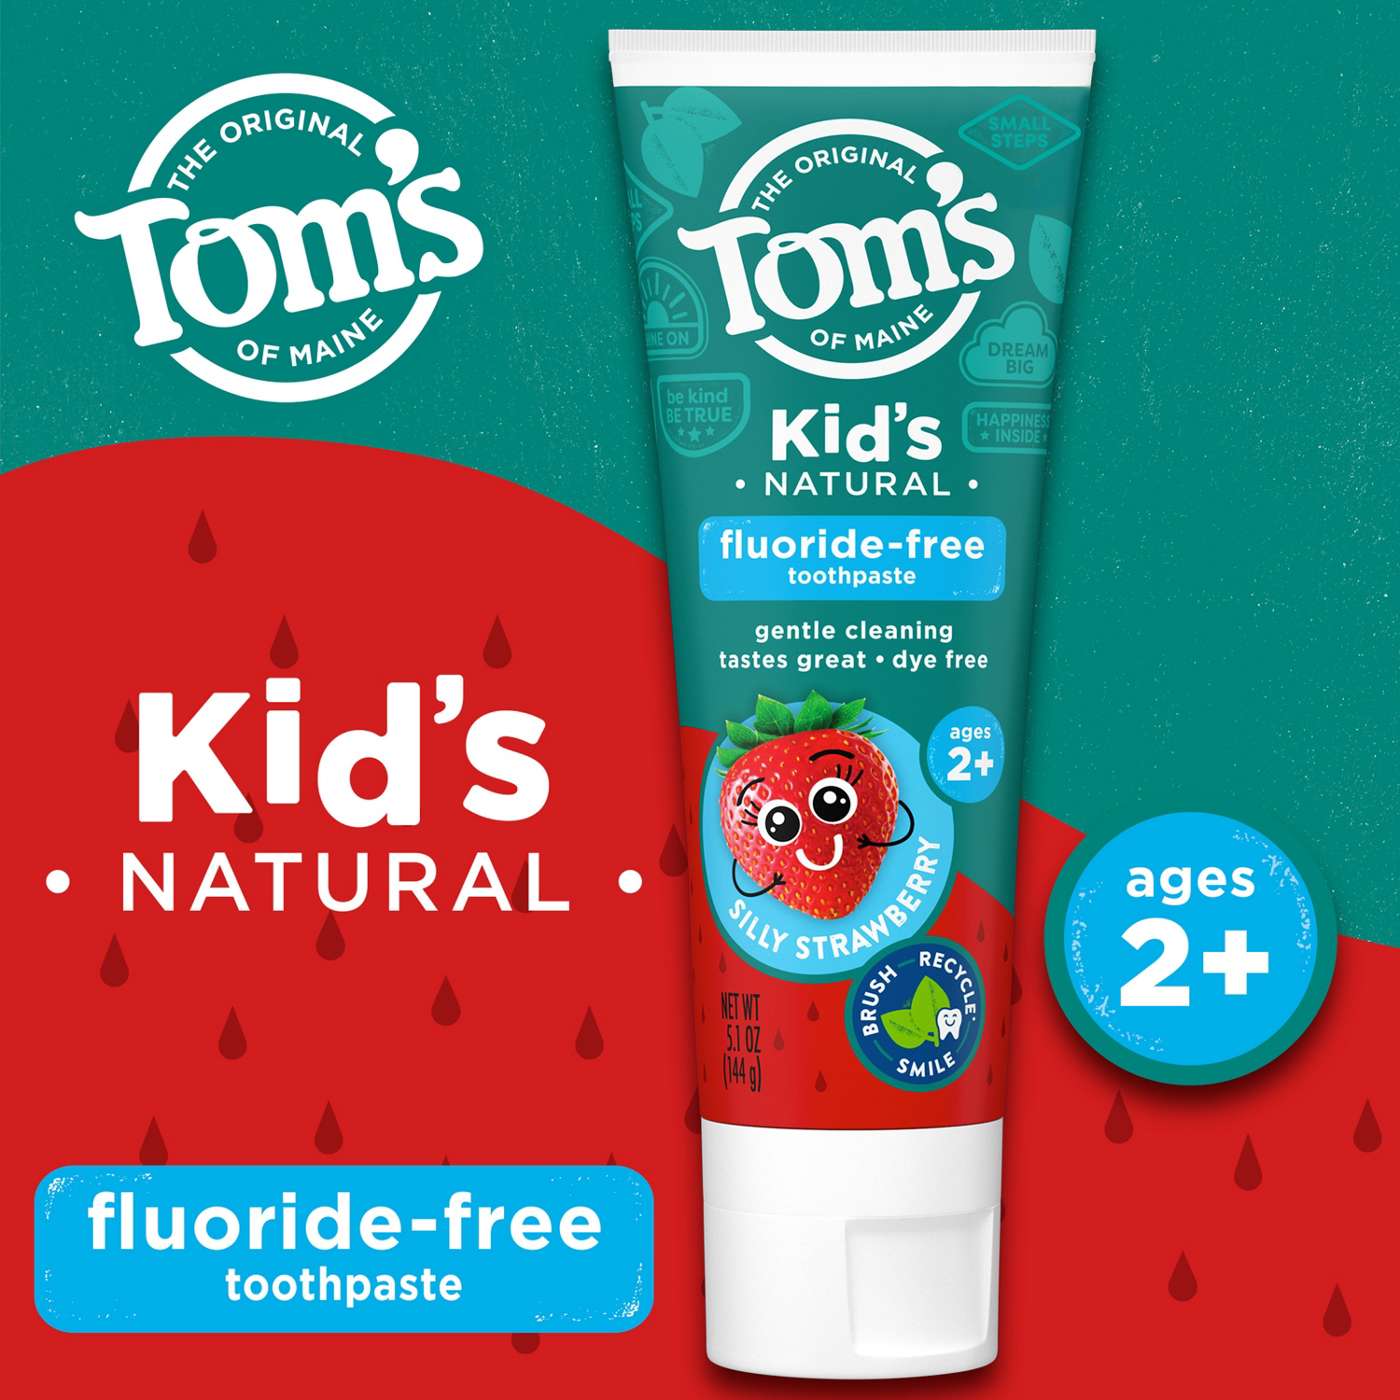 Tom's of Maine Kids Natural Toothpaste - Silly Strawberry; image 6 of 8